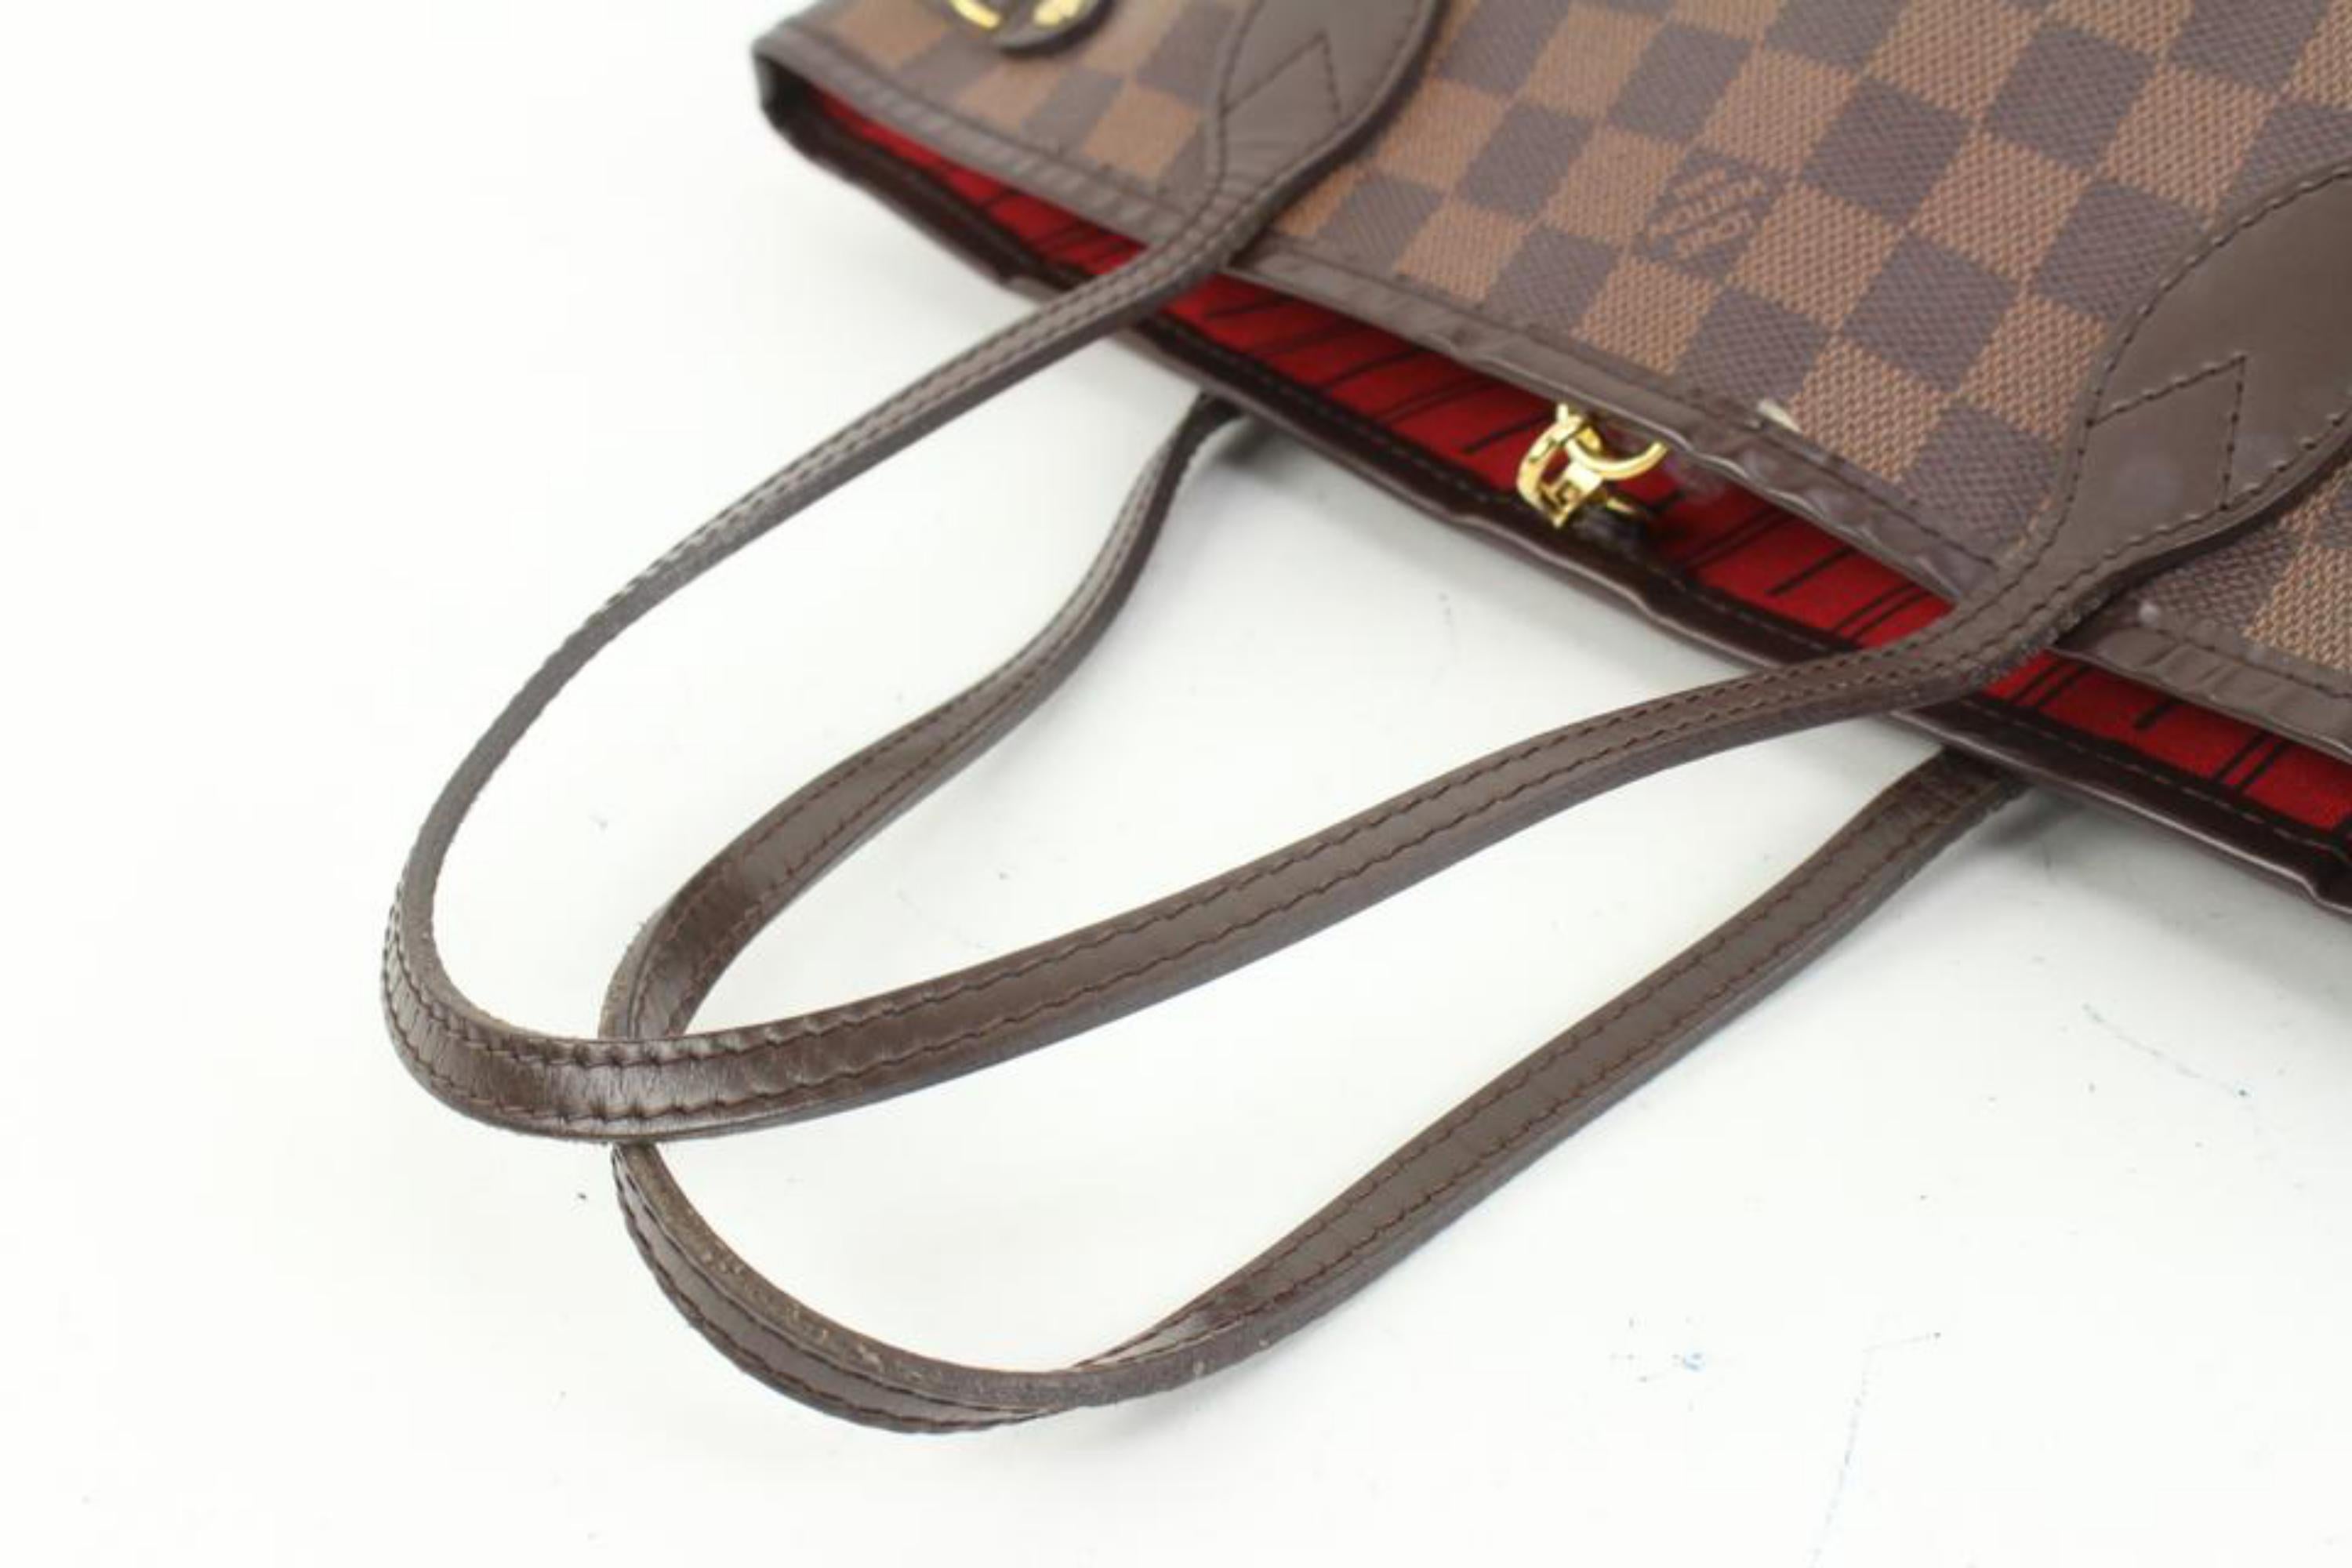 Louis Vuitton Small Damier Ebene Neverfull PM Tote Bag 94lz425s In Good Condition For Sale In Dix hills, NY